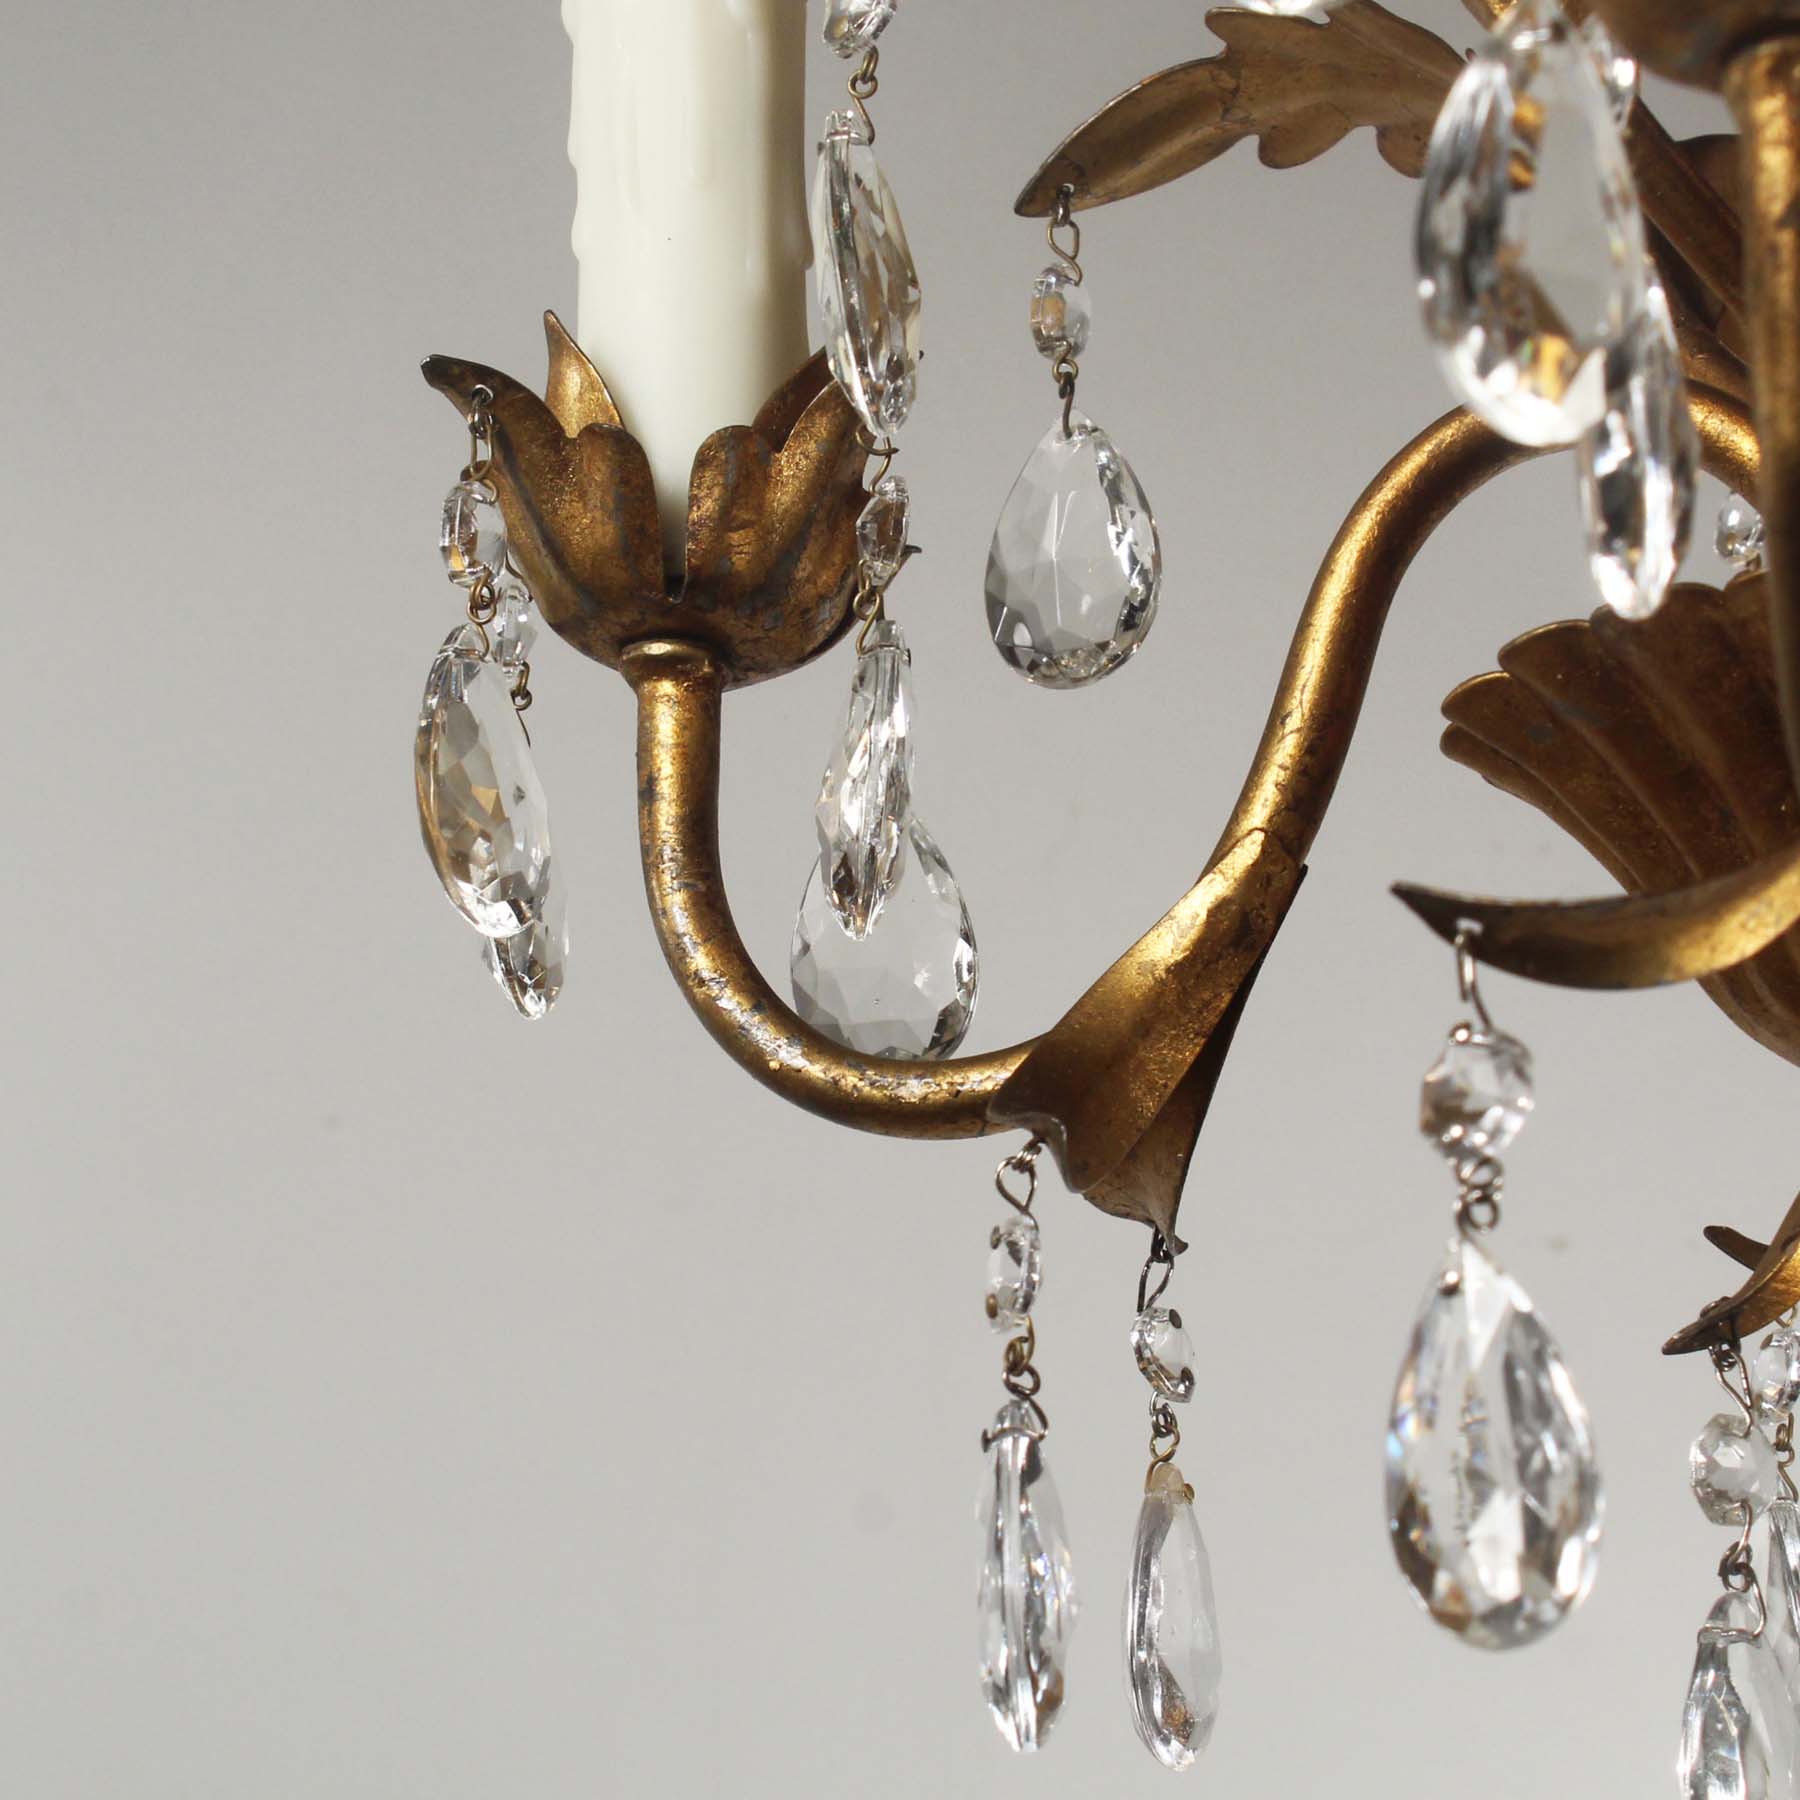 SOLD Vintage Neoclassical Brass Chandelier with Prisms-67529